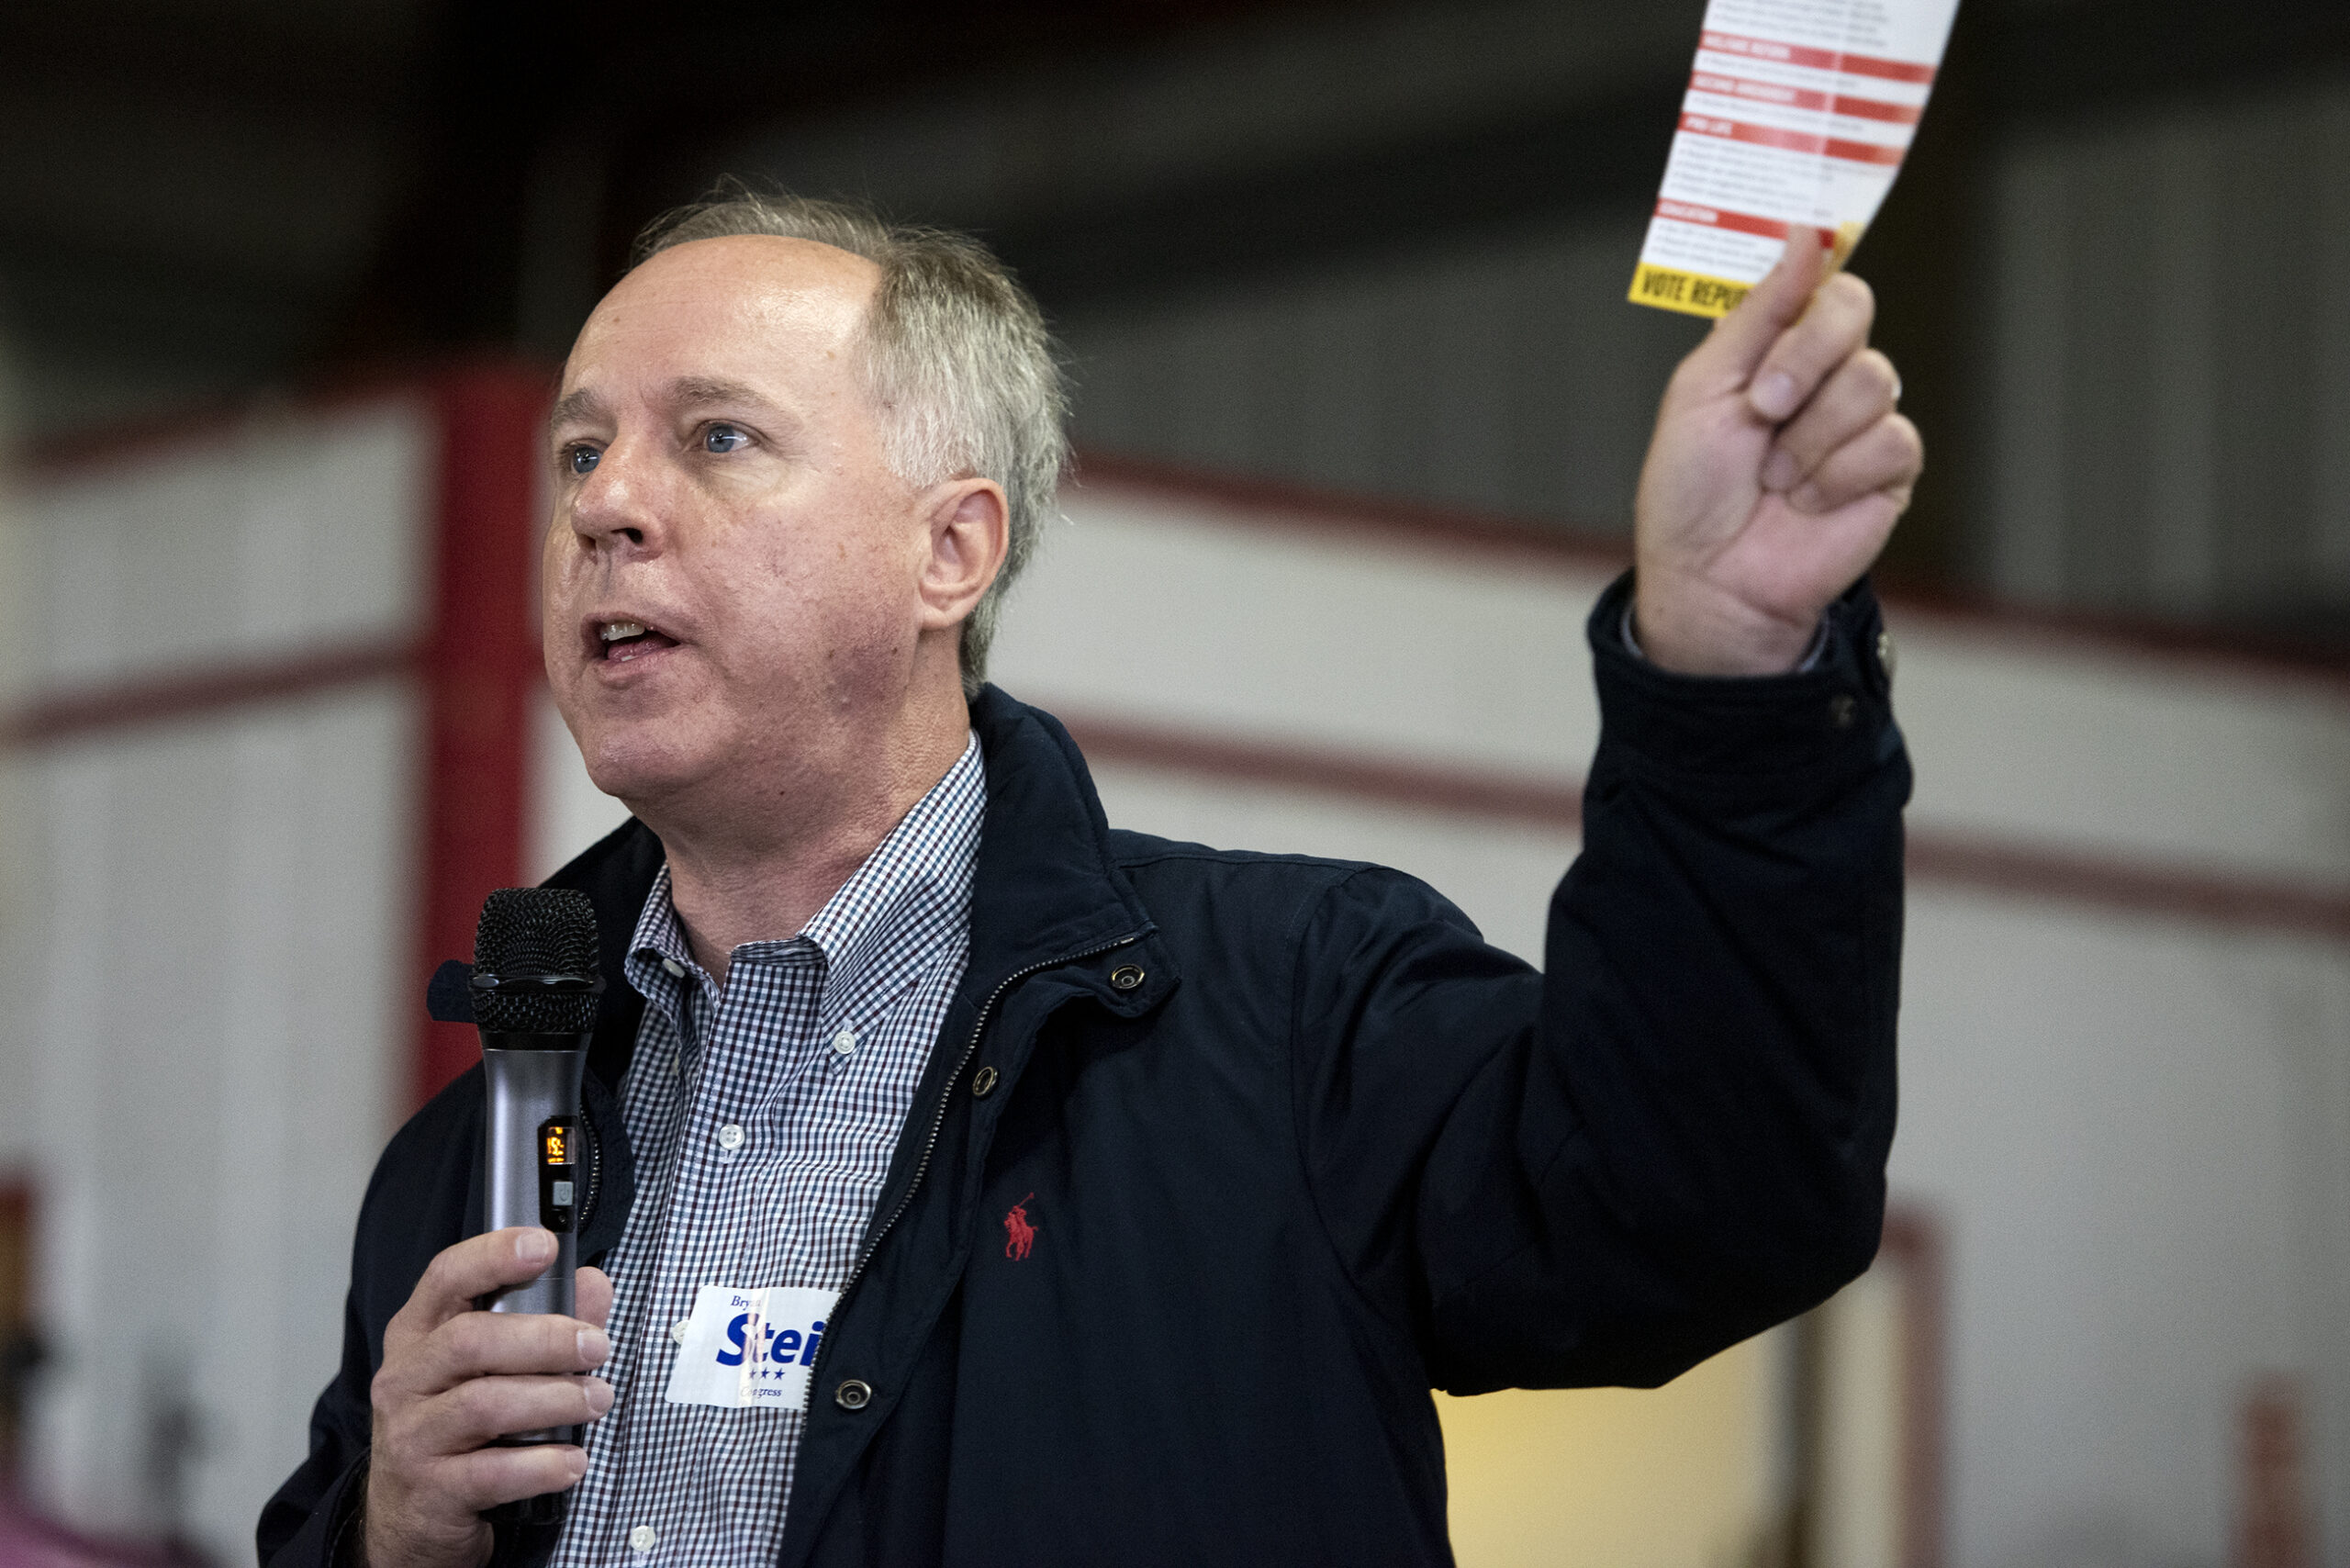 Assembly Speaker Robin Vos gestures while speaking.